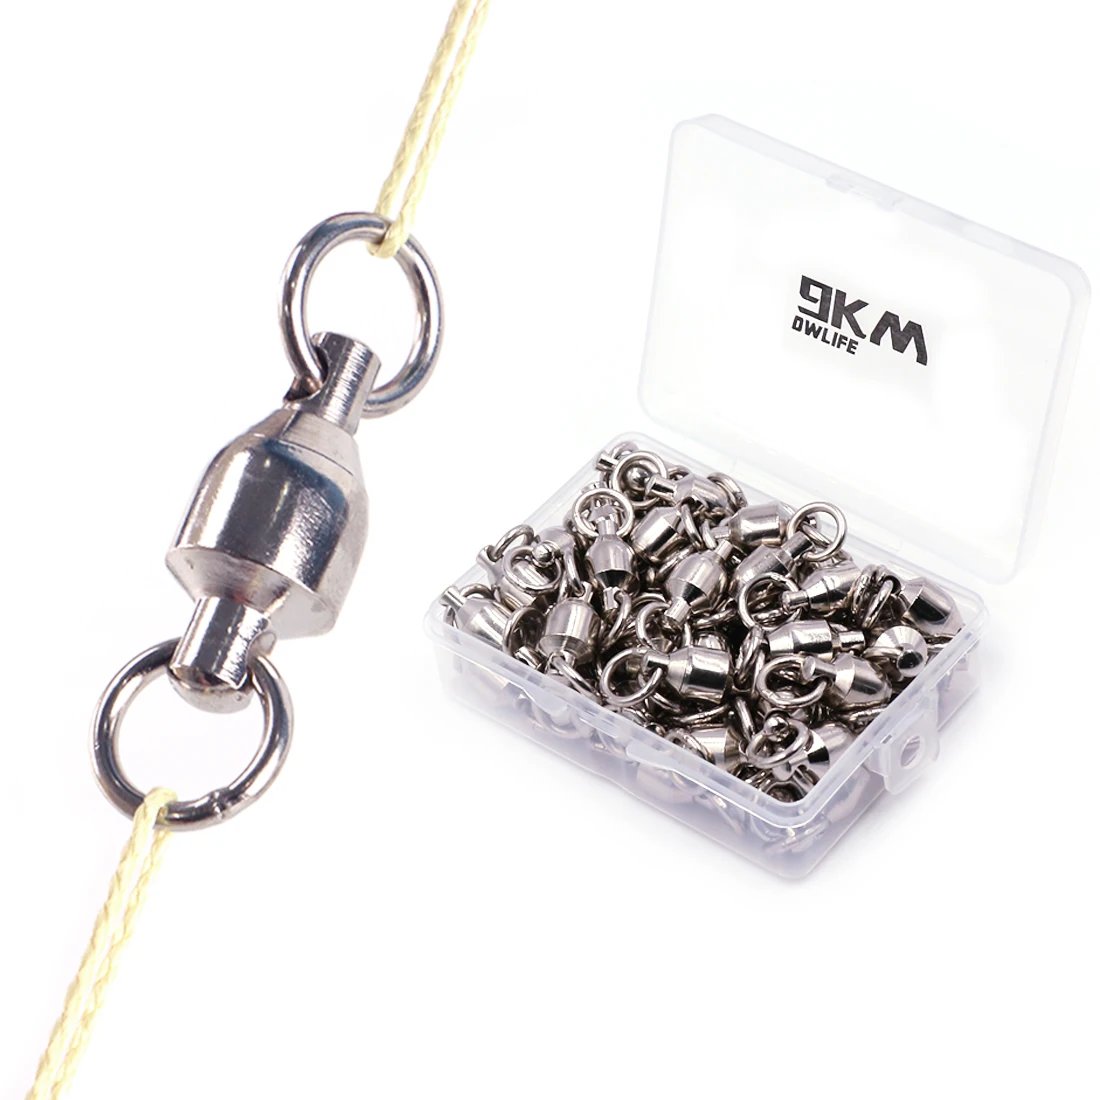 Ball Bearing Swivel Fishing Accessories Coppery & Stainless Steel